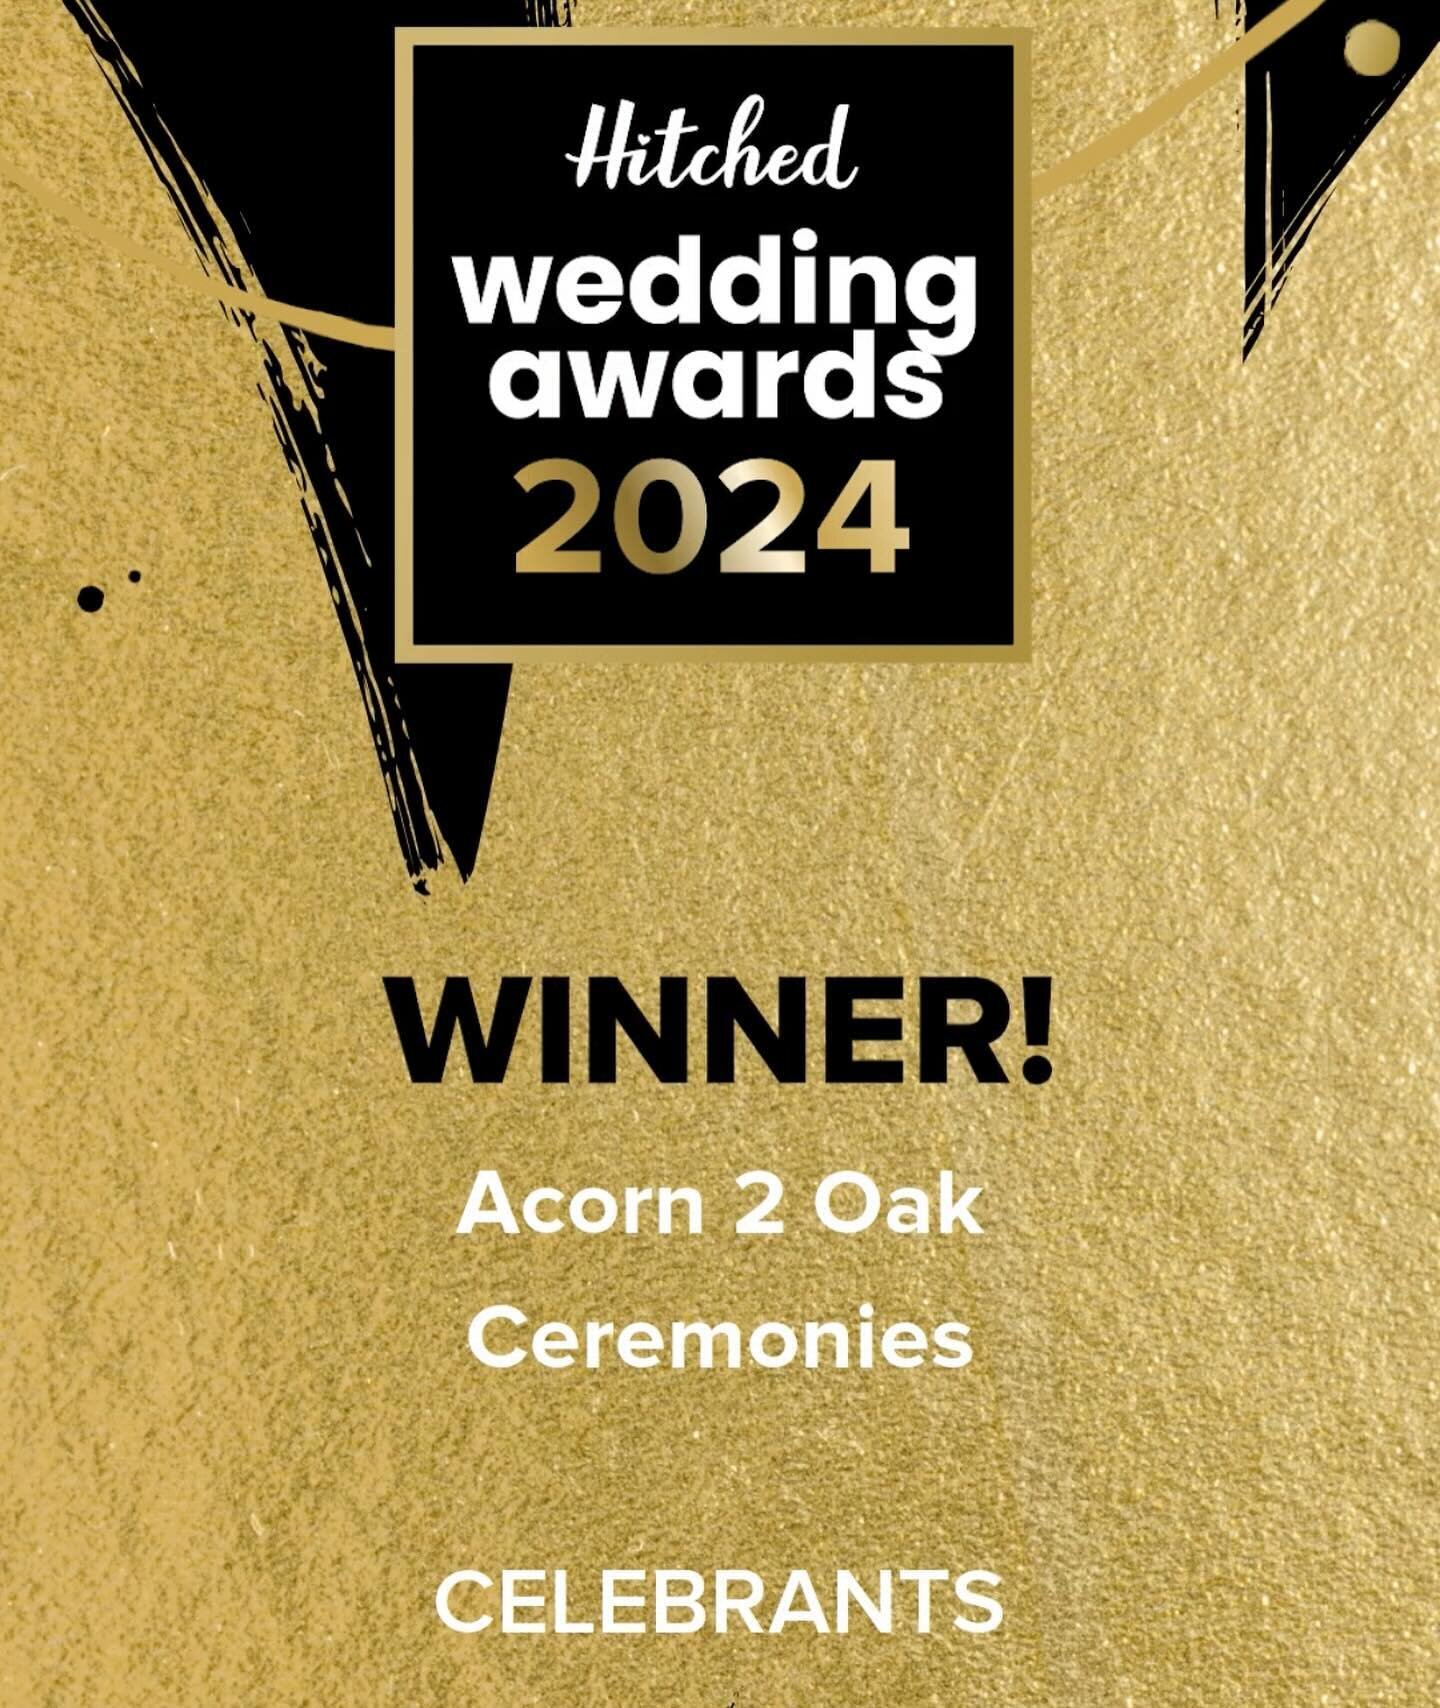 Thank you to all my amazing couples in 2023 &amp; their wonderful reviews on @hitcheduk , @bridebookbusiness , Google &amp; @thecelebrantdirectory 

Thank you for your kind words &amp; support 💕💕

We won! 

#hitchedweddingawards2024 
#bridebookwedd